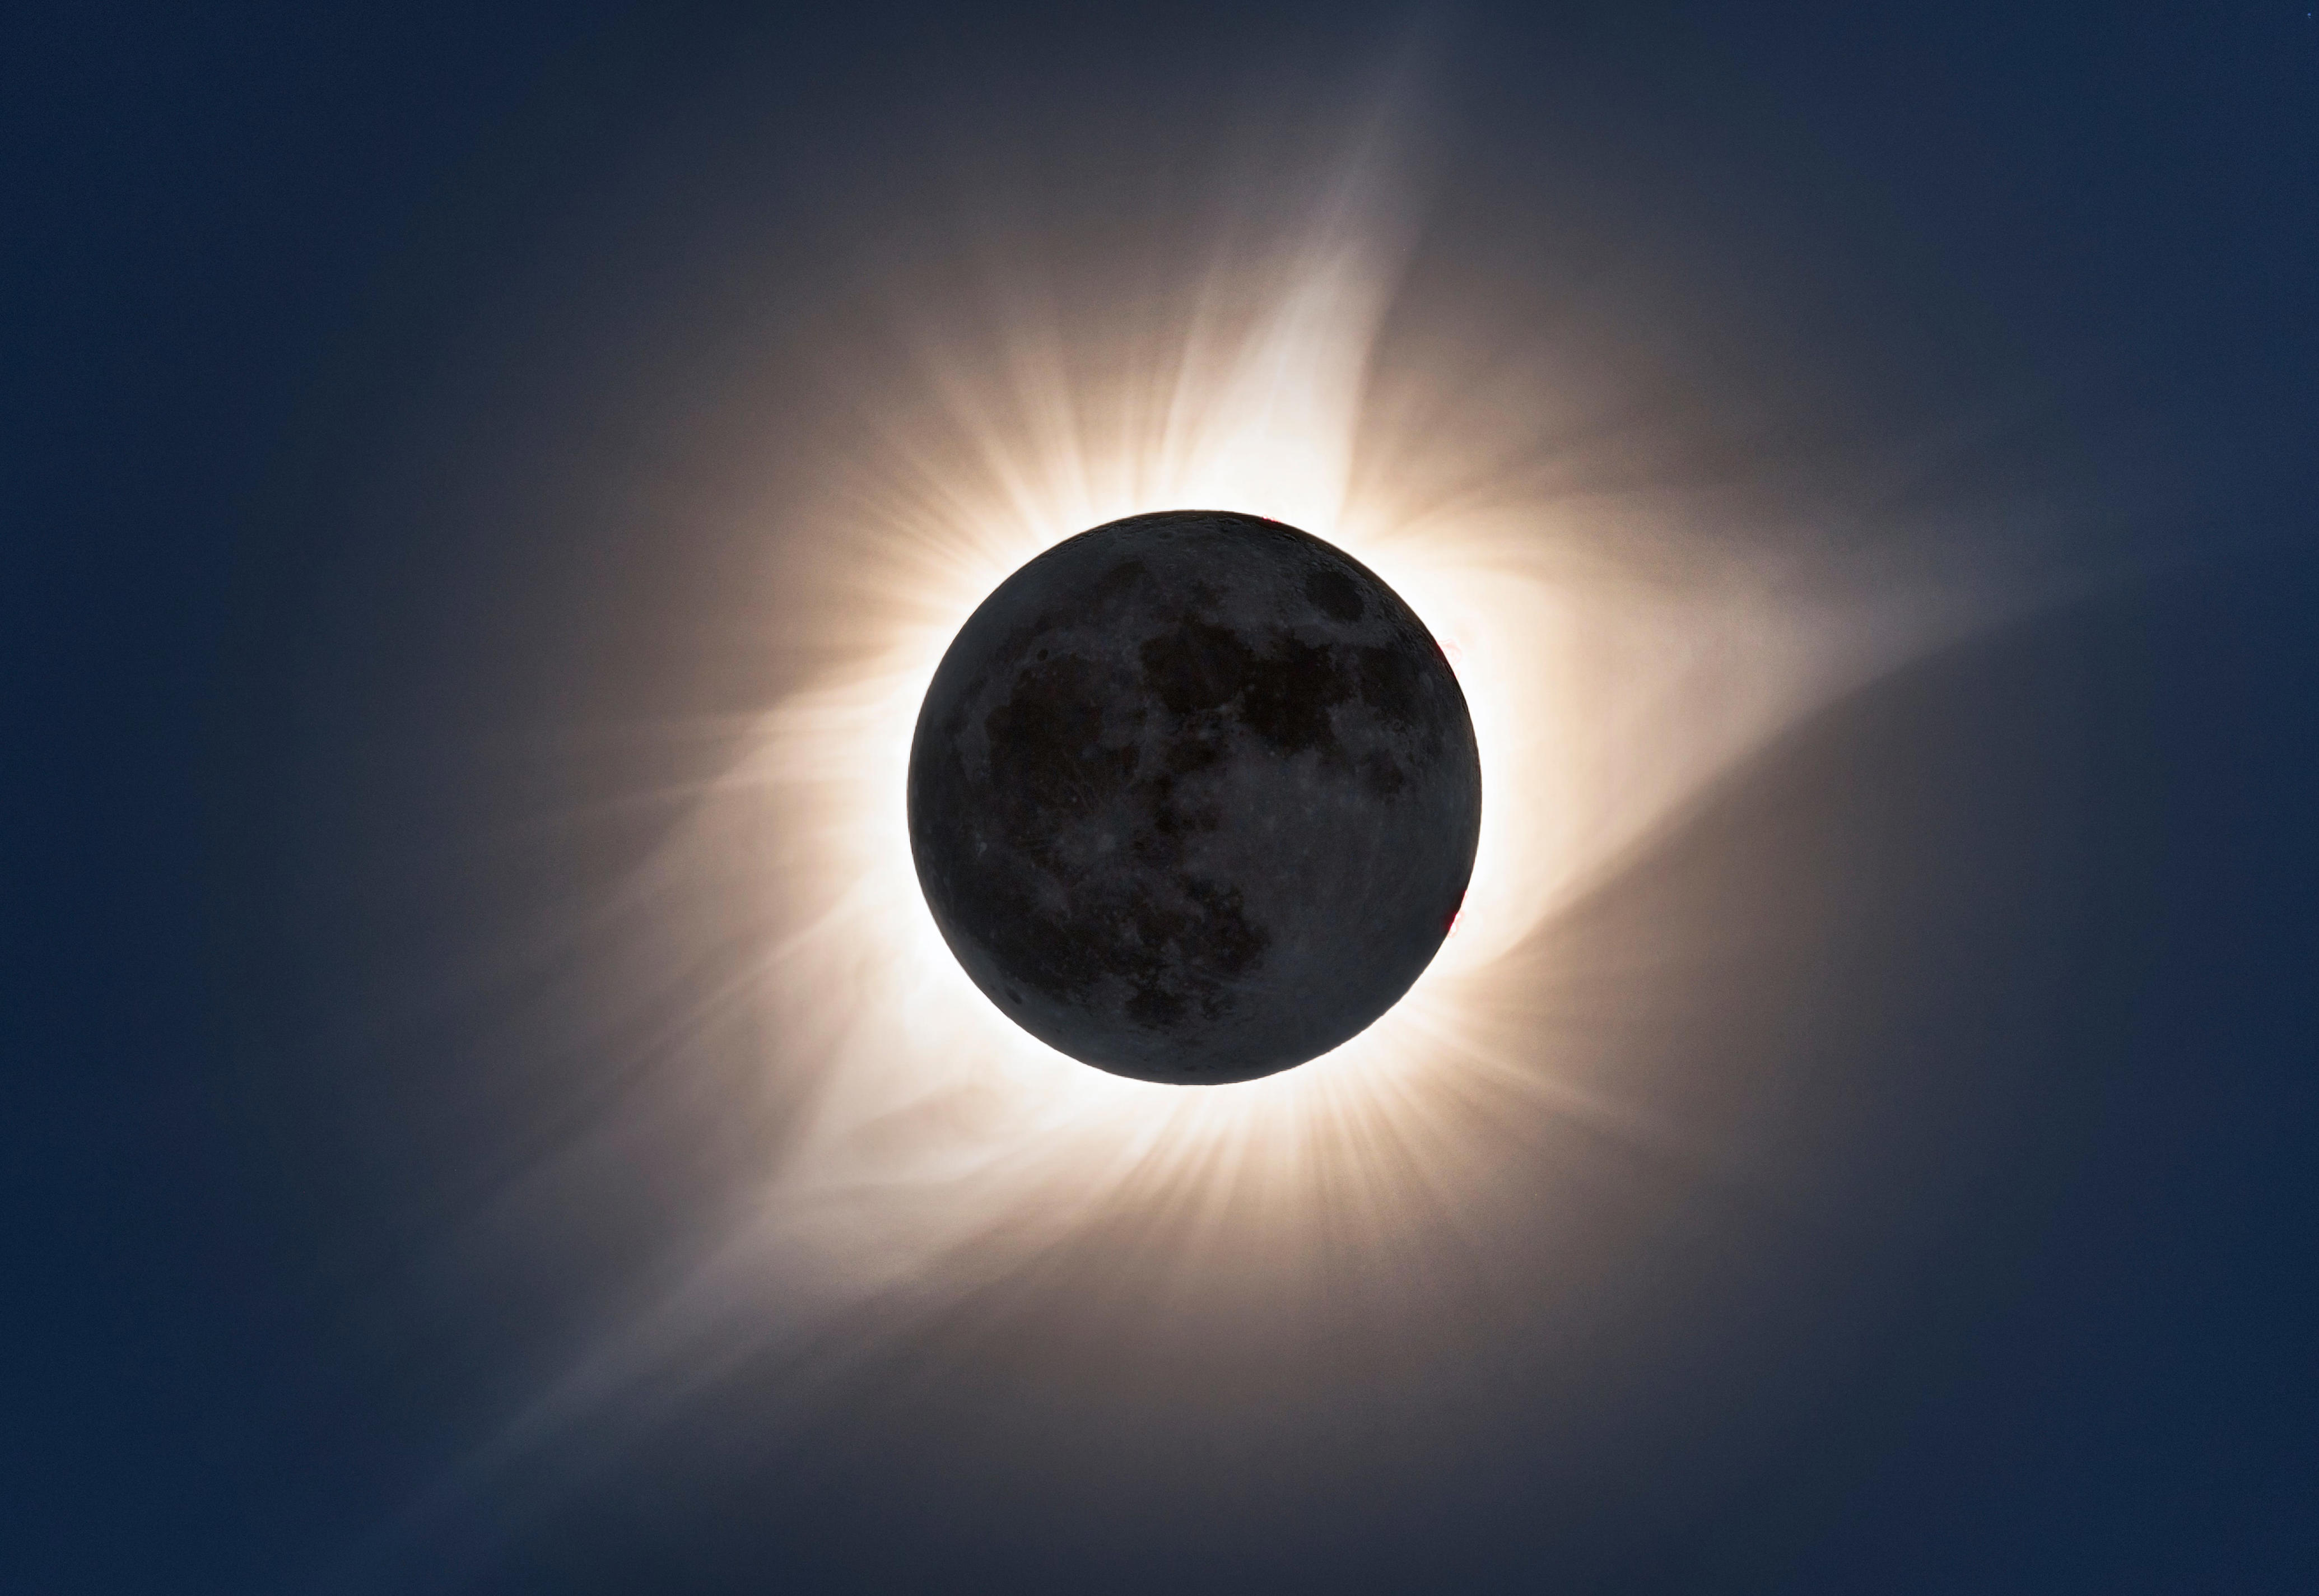 The 2017 total solar eclipse at 100% totality. <a>John Finney photography / Getty Images</a>